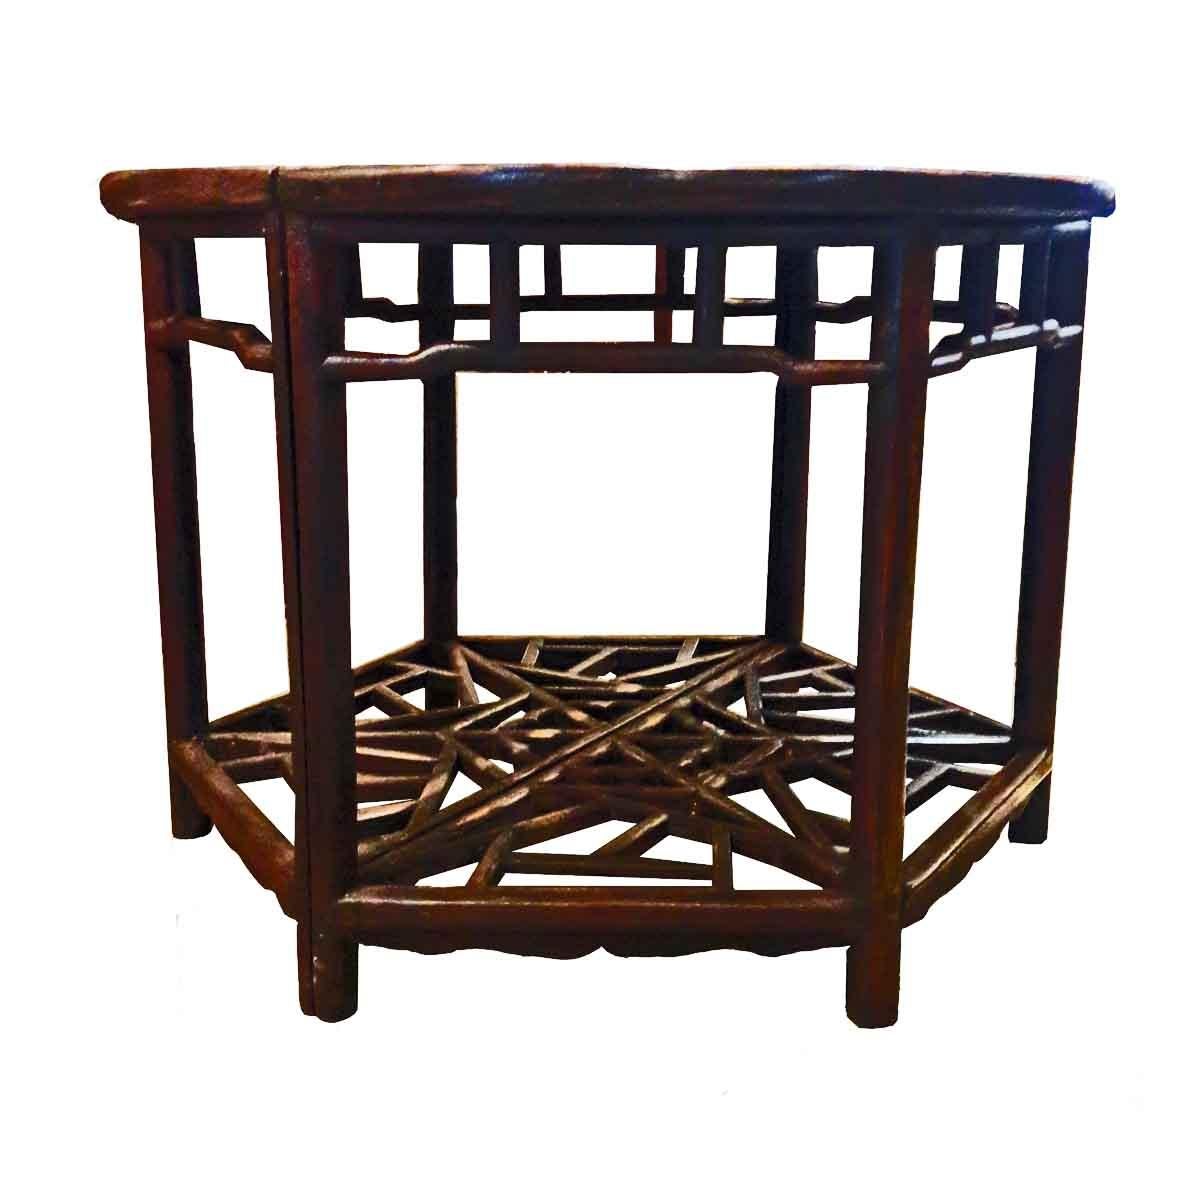 Chinese Cypresswood Demi-Lune Tables, Suzhou, Early 19th Century